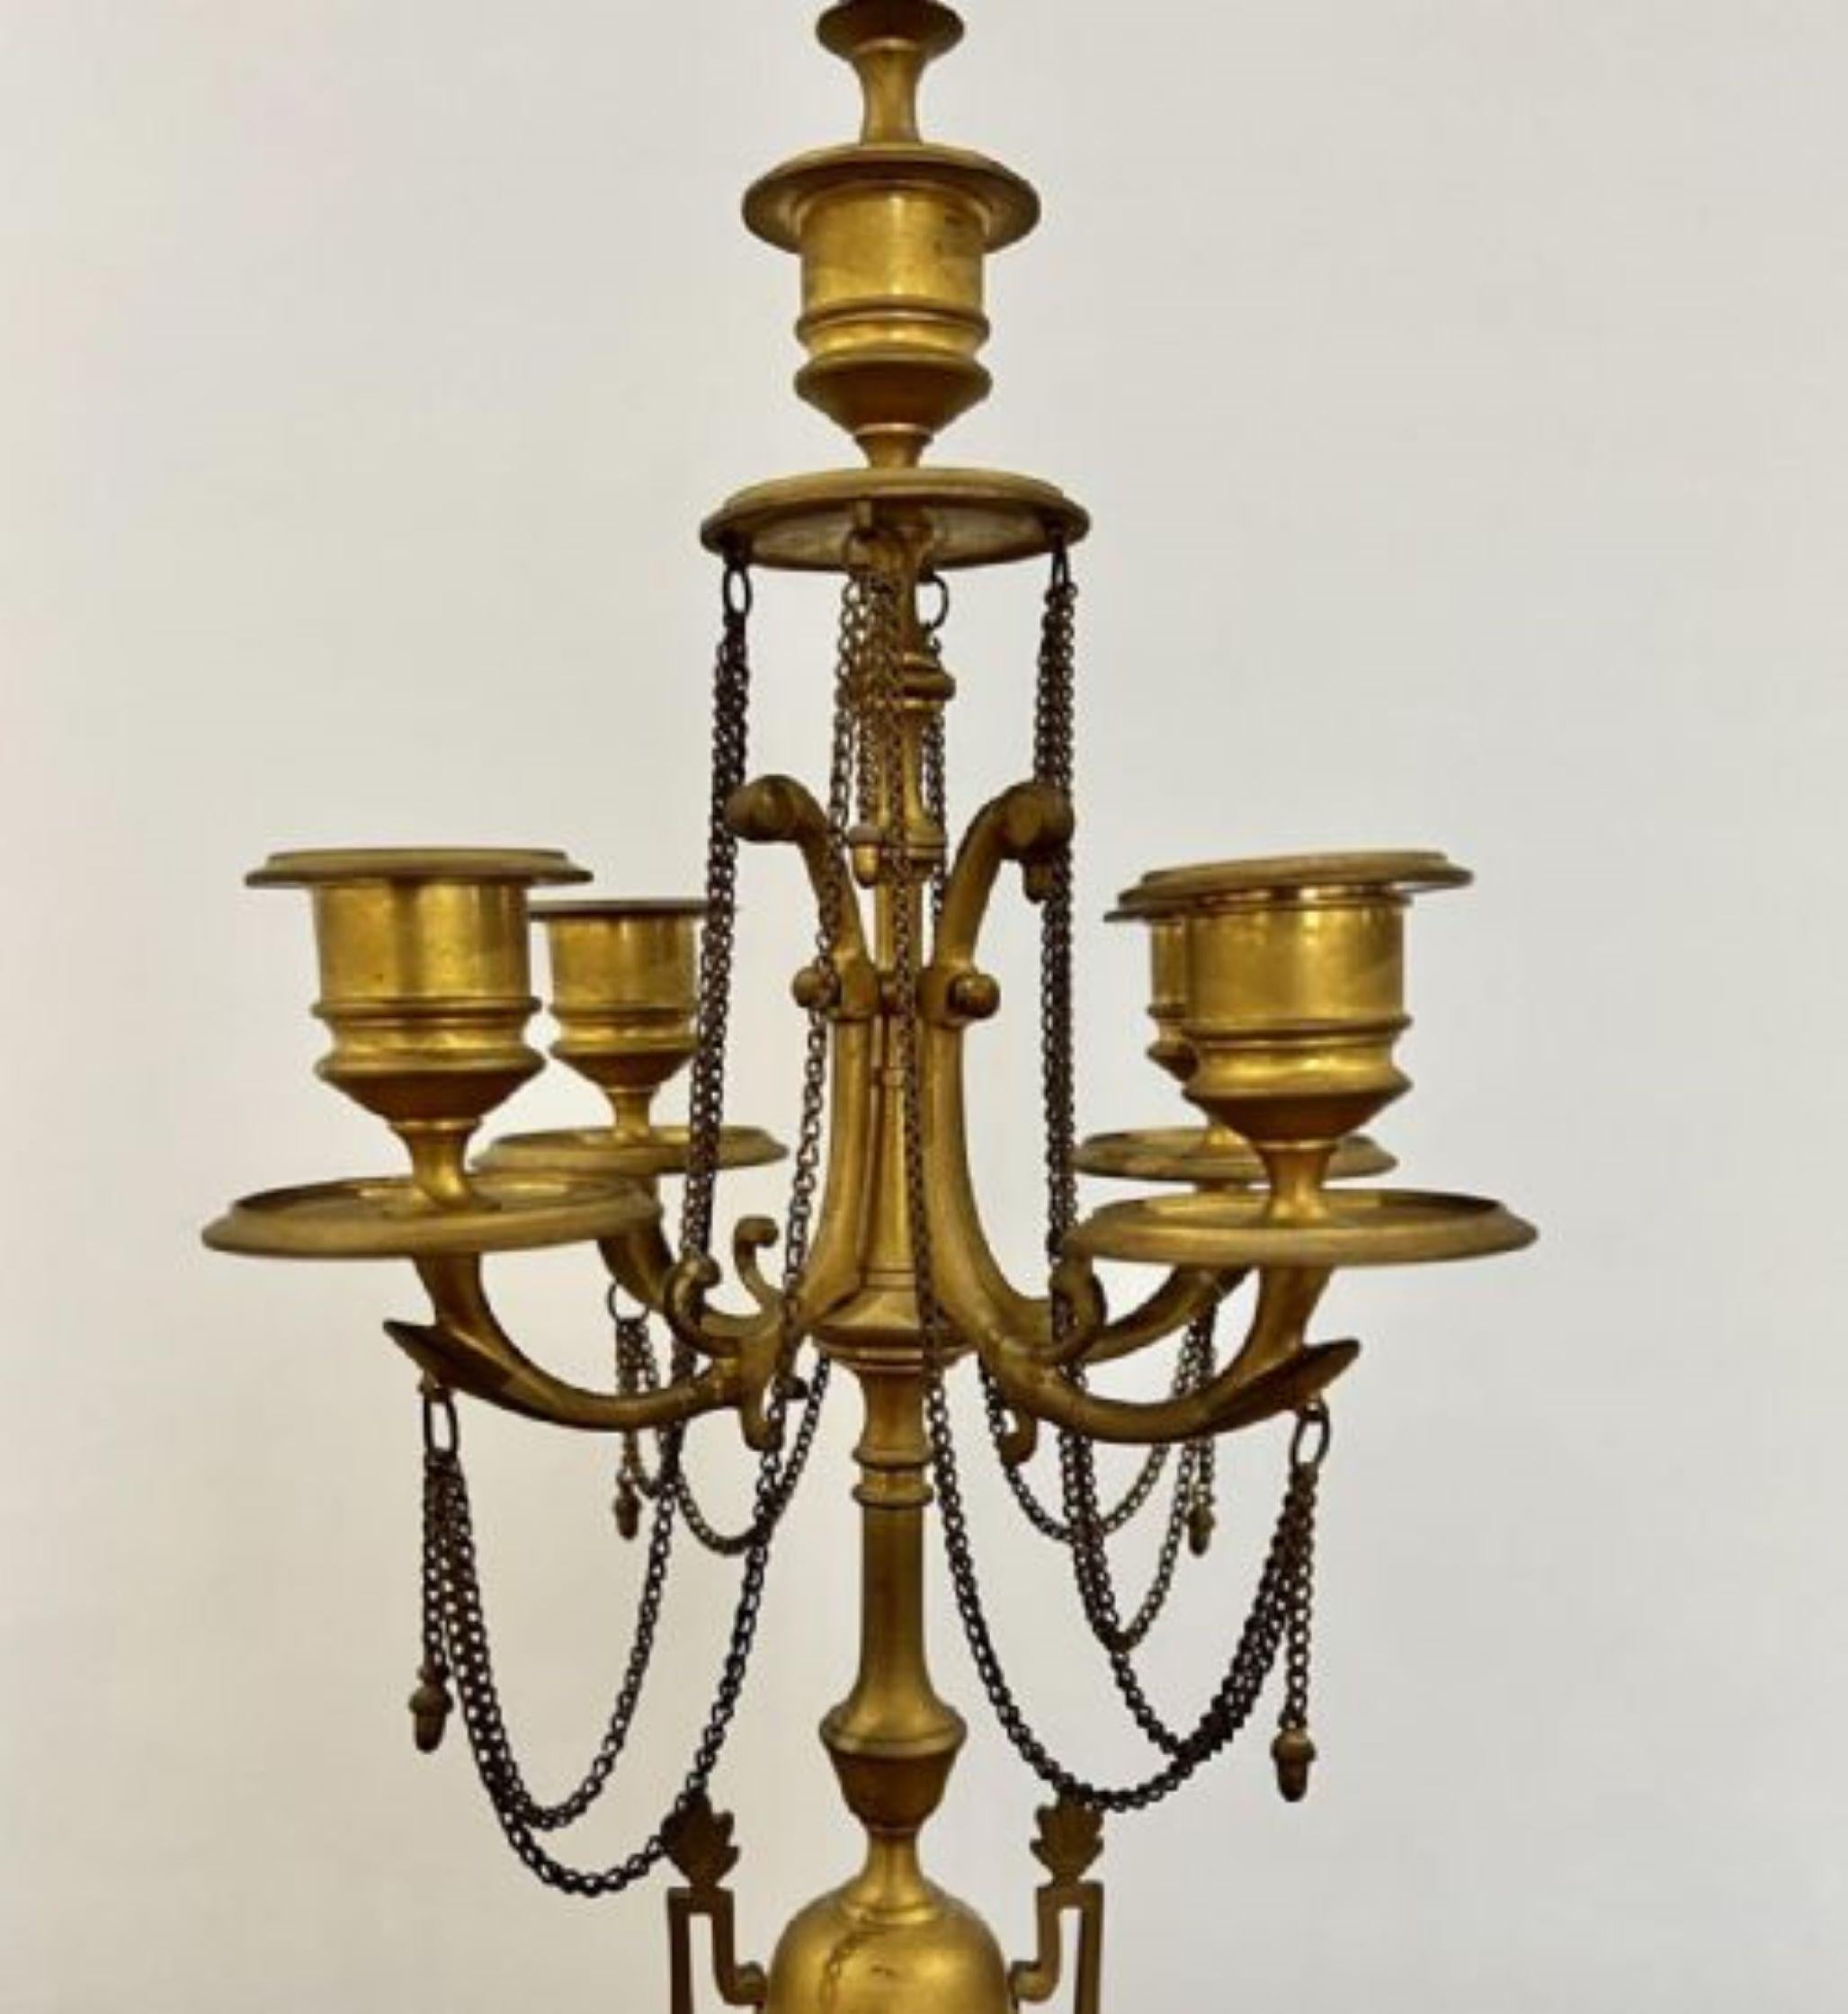 Large pair of mid 19th Century Victorian antique quality gilded brass candelabras having a quality pair of antique Victorian gilded brass candelabras with five candle lights, original drop chains supported on a turned brass column and standing on a